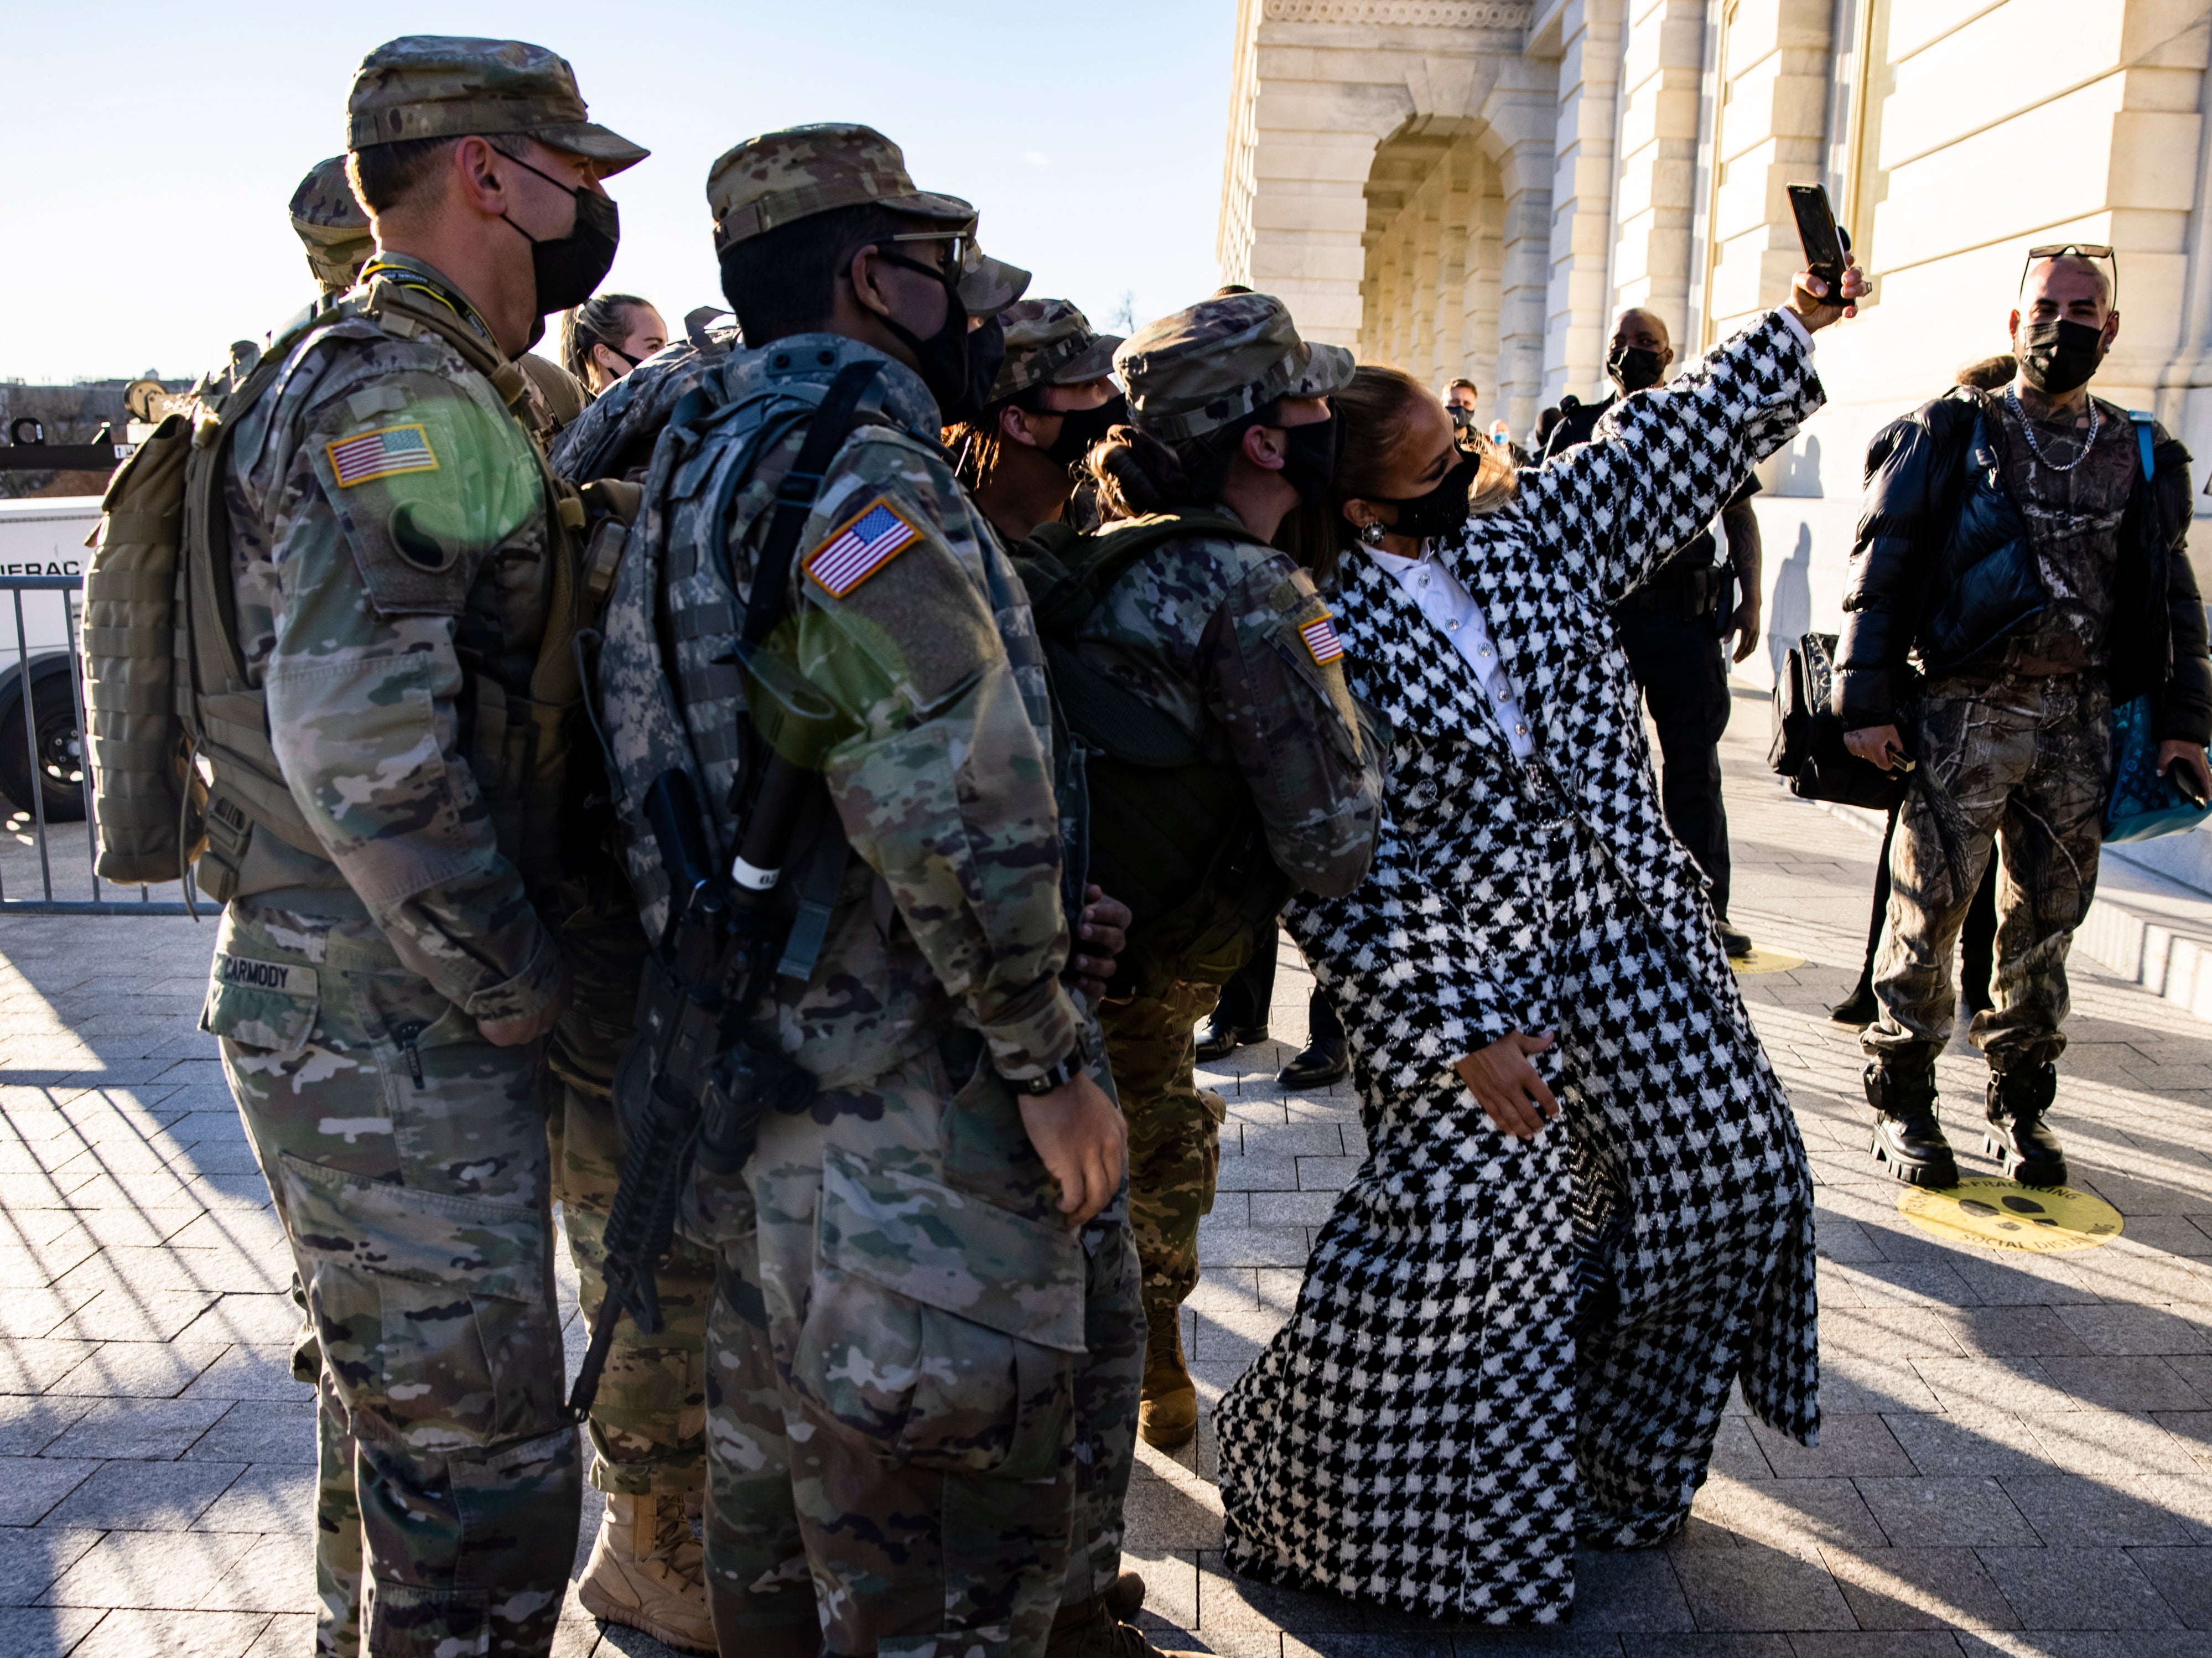 Jennifer Lopez stops to take a selfie with a group fo Maryland National Guard soldiers as she leaves the US Capitol building